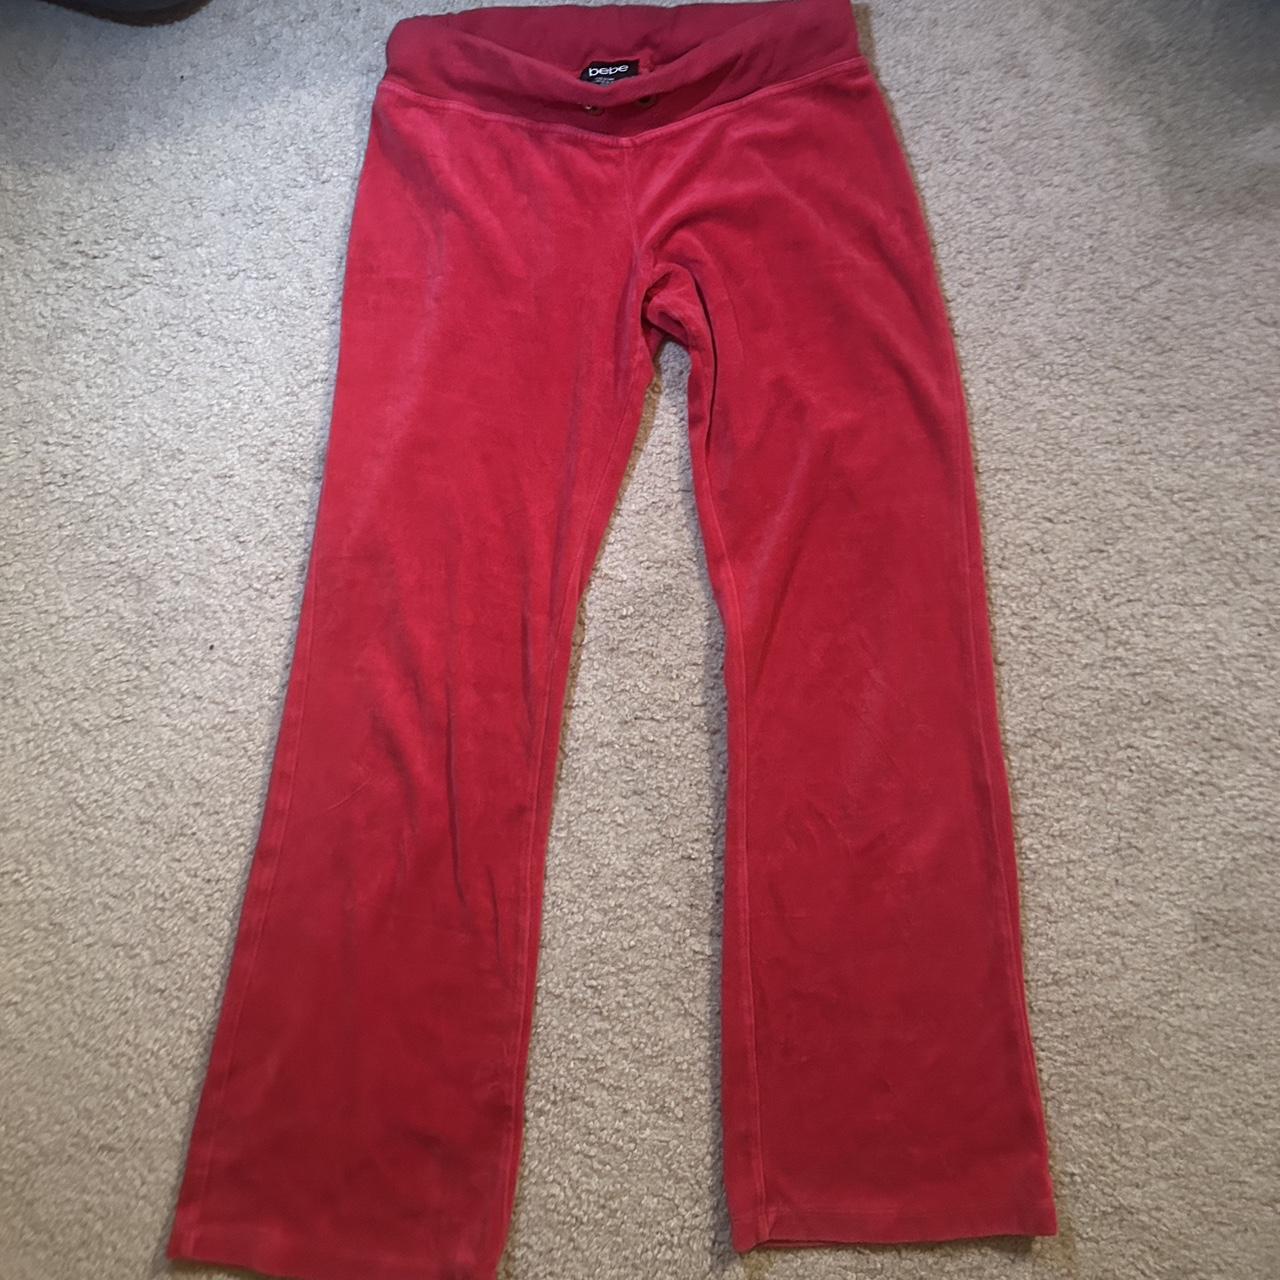 xs flare velour sweatpants. bedazzled “bebe” on the... - Depop